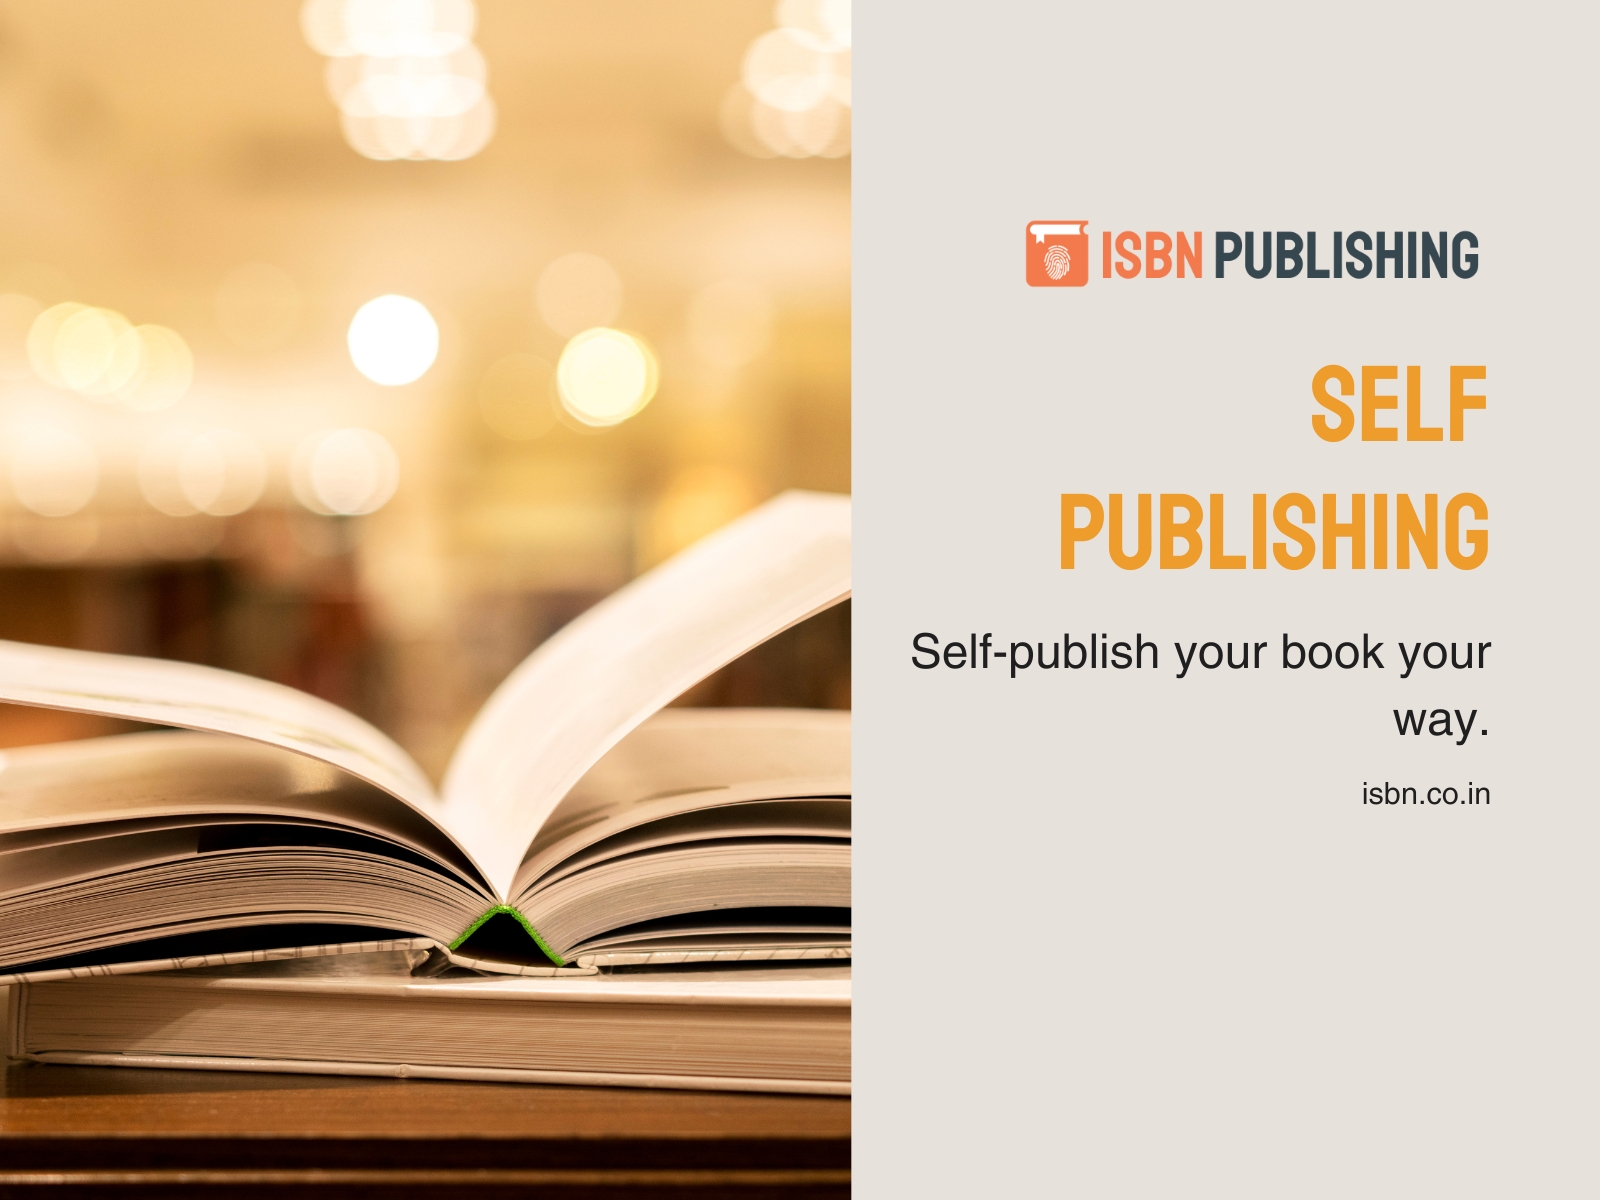 Self-publish your book your way. No need to pitch your work to book publishers and hire literary agent.